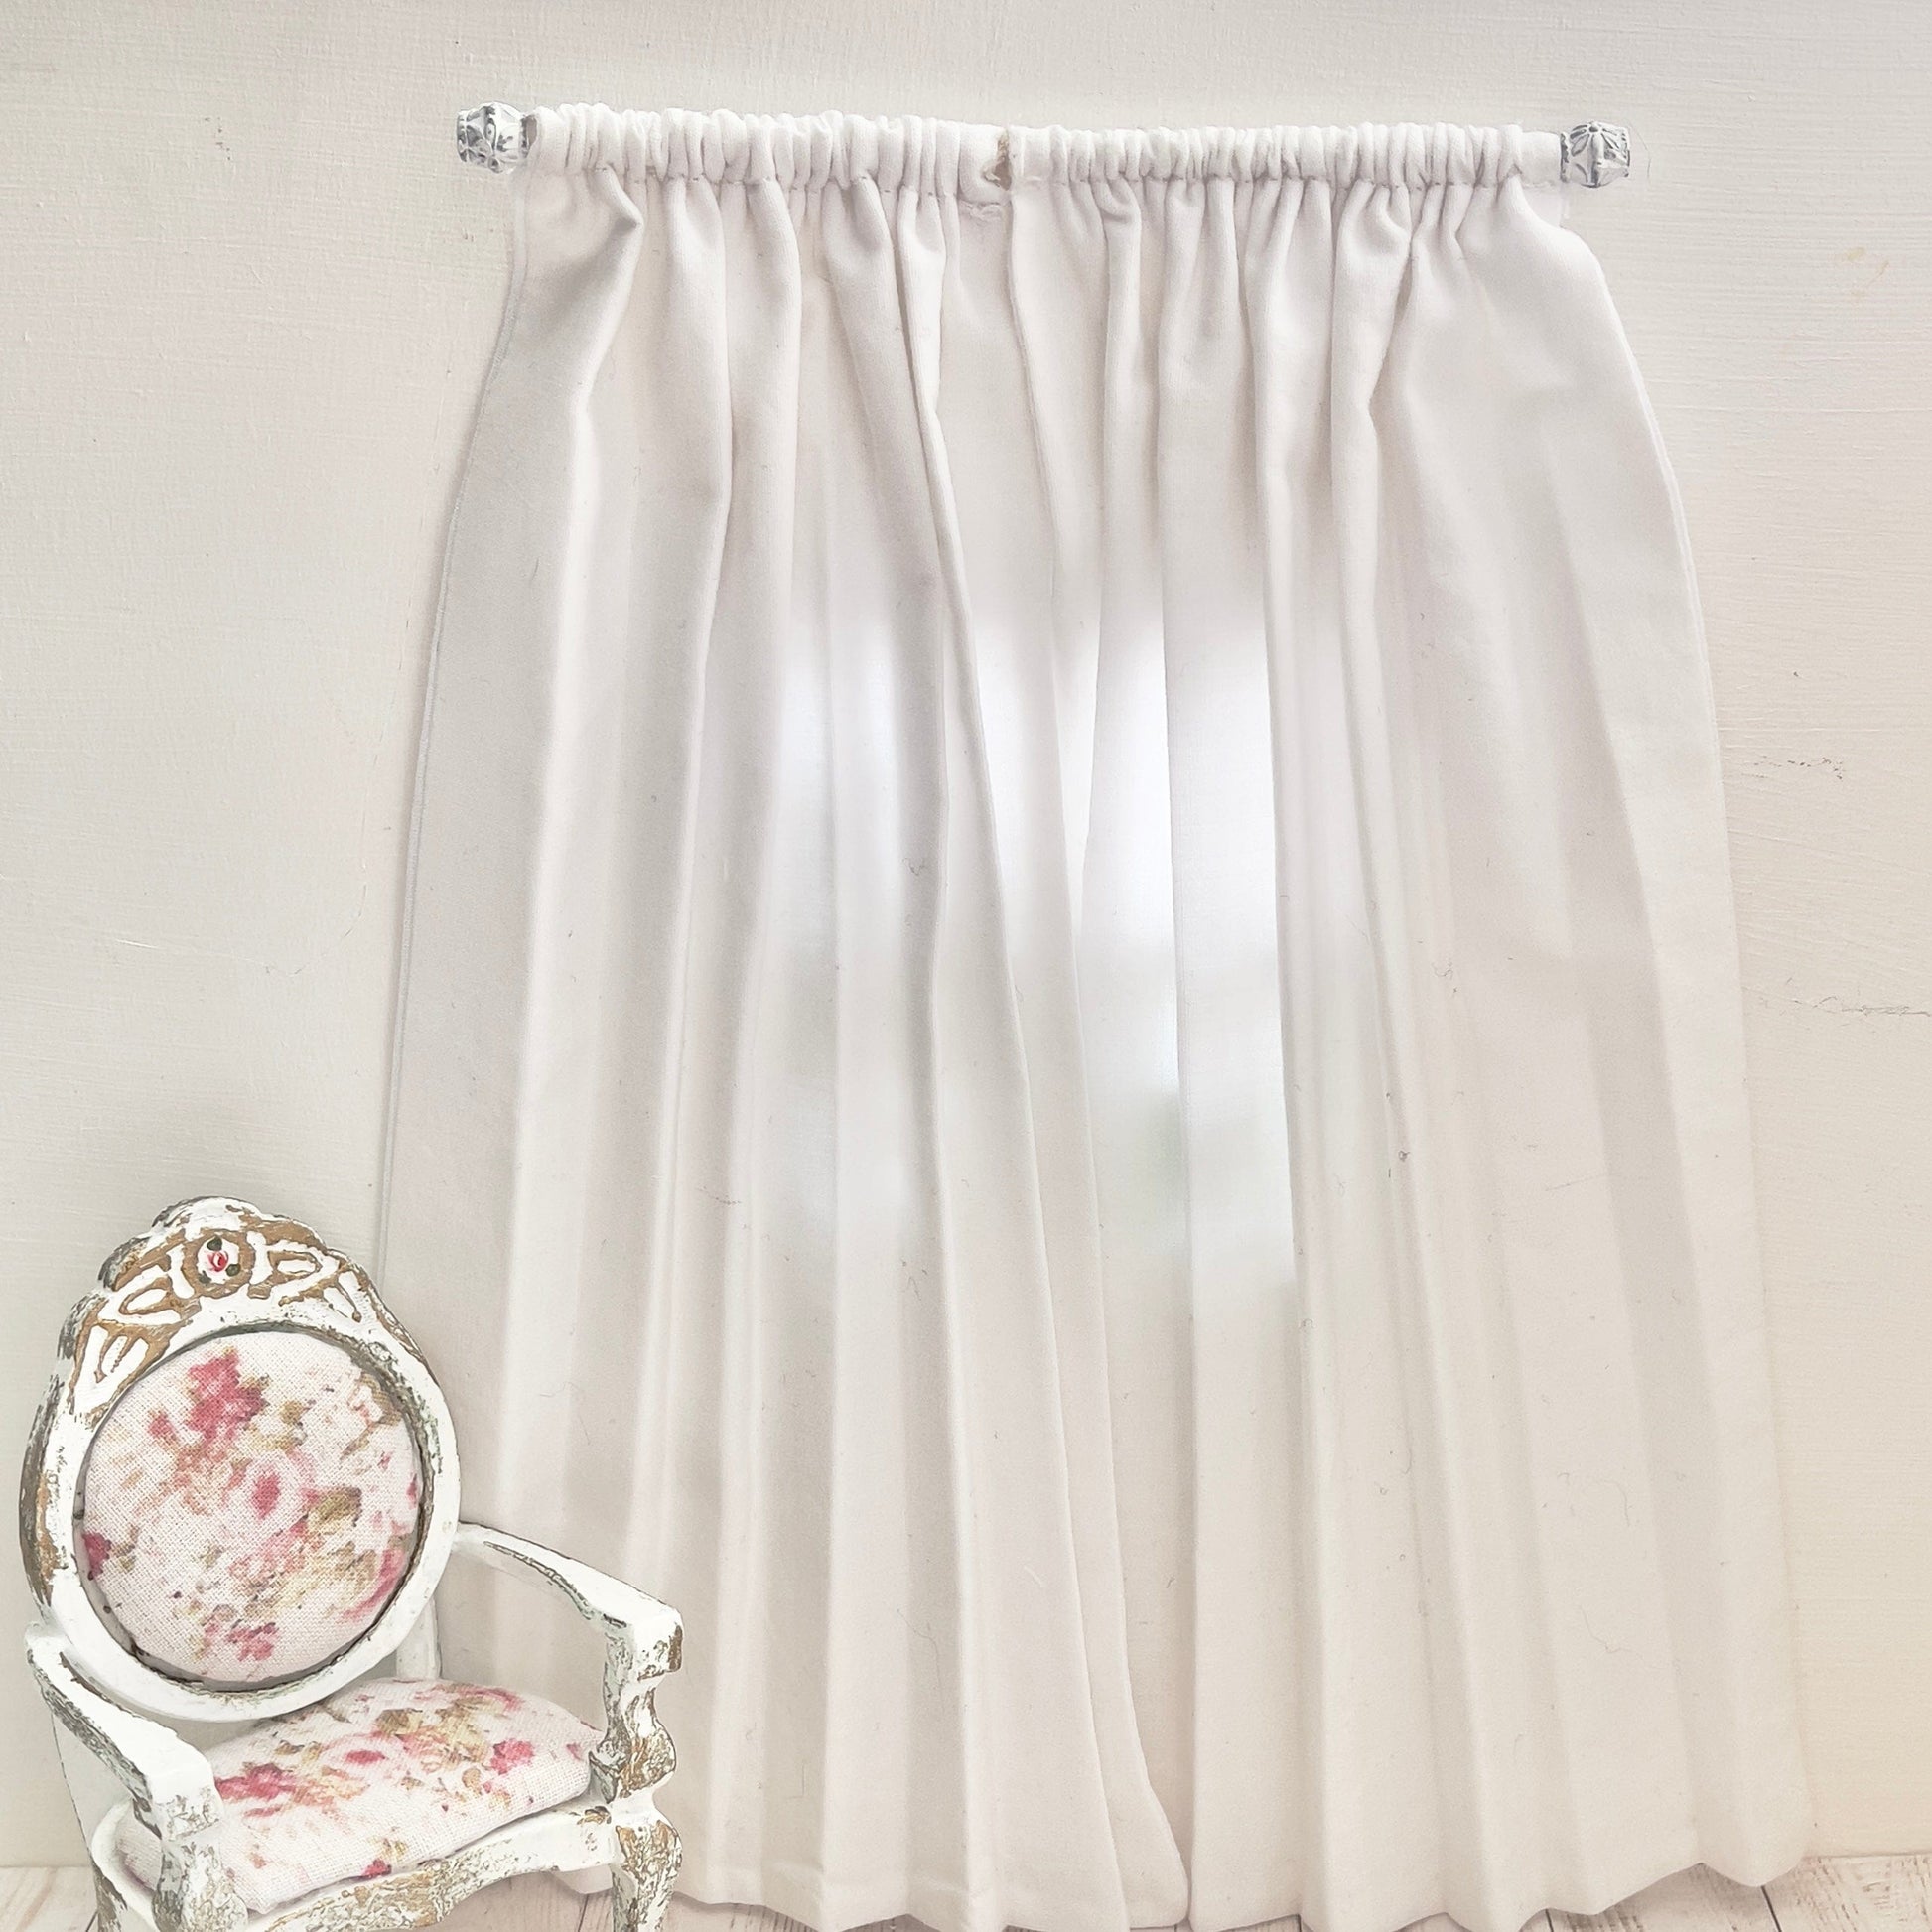 Chantallena Doll House Dollhouse Accessories CURTAINS - Shabby White 2 Panel Cotton Curtains | White Shabby | Soft Furnishings